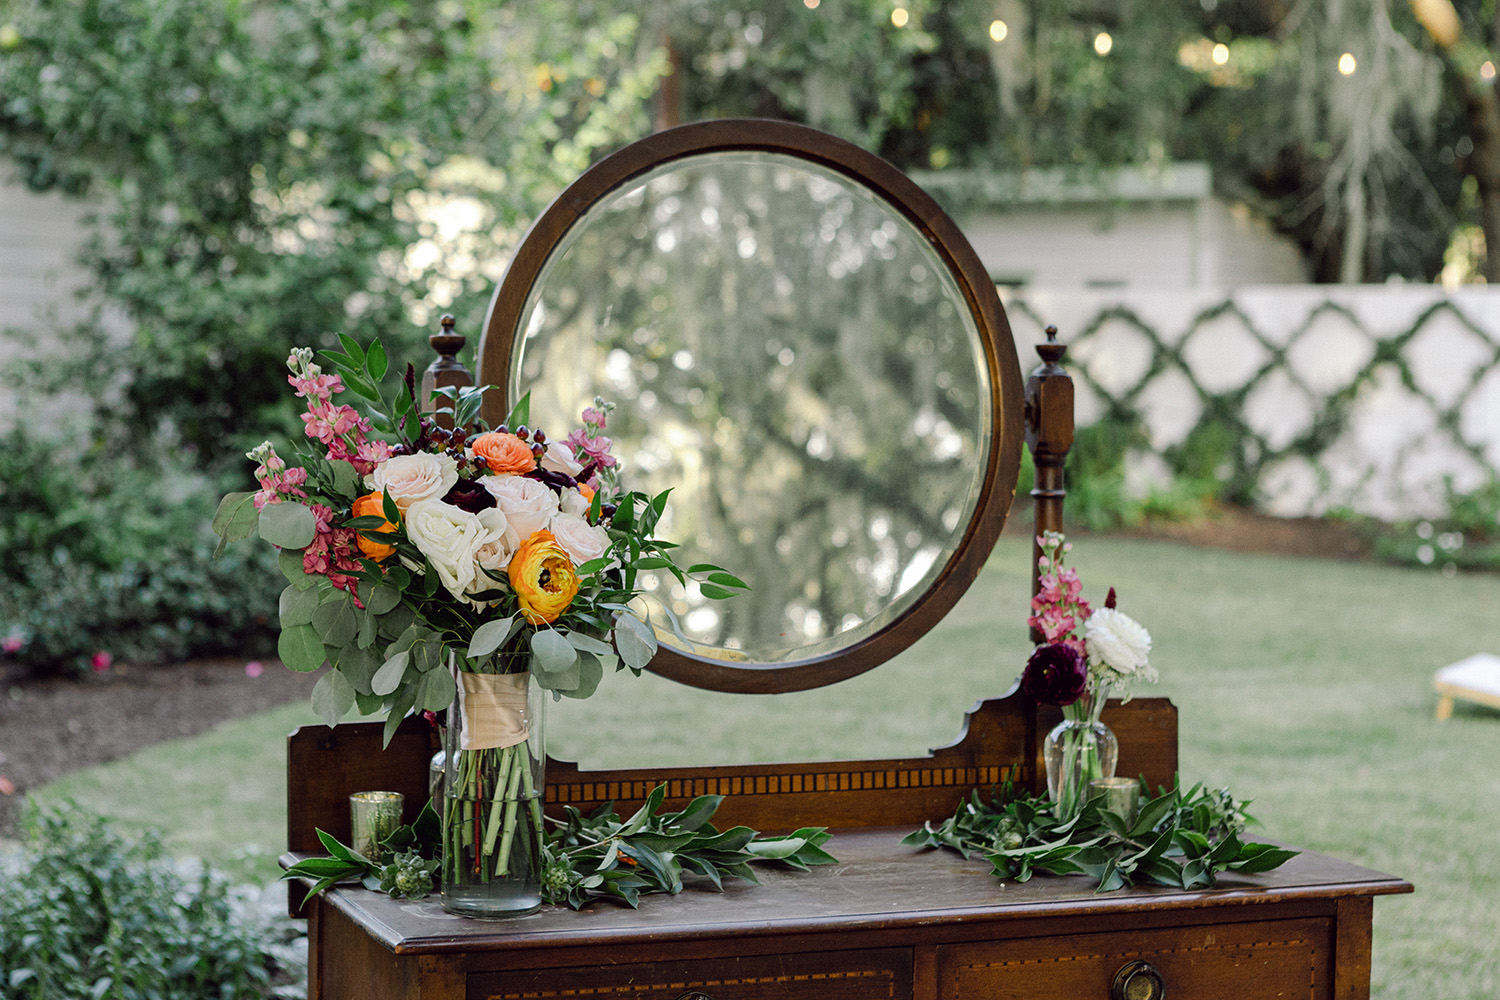 Decorated table with mirror and florals.